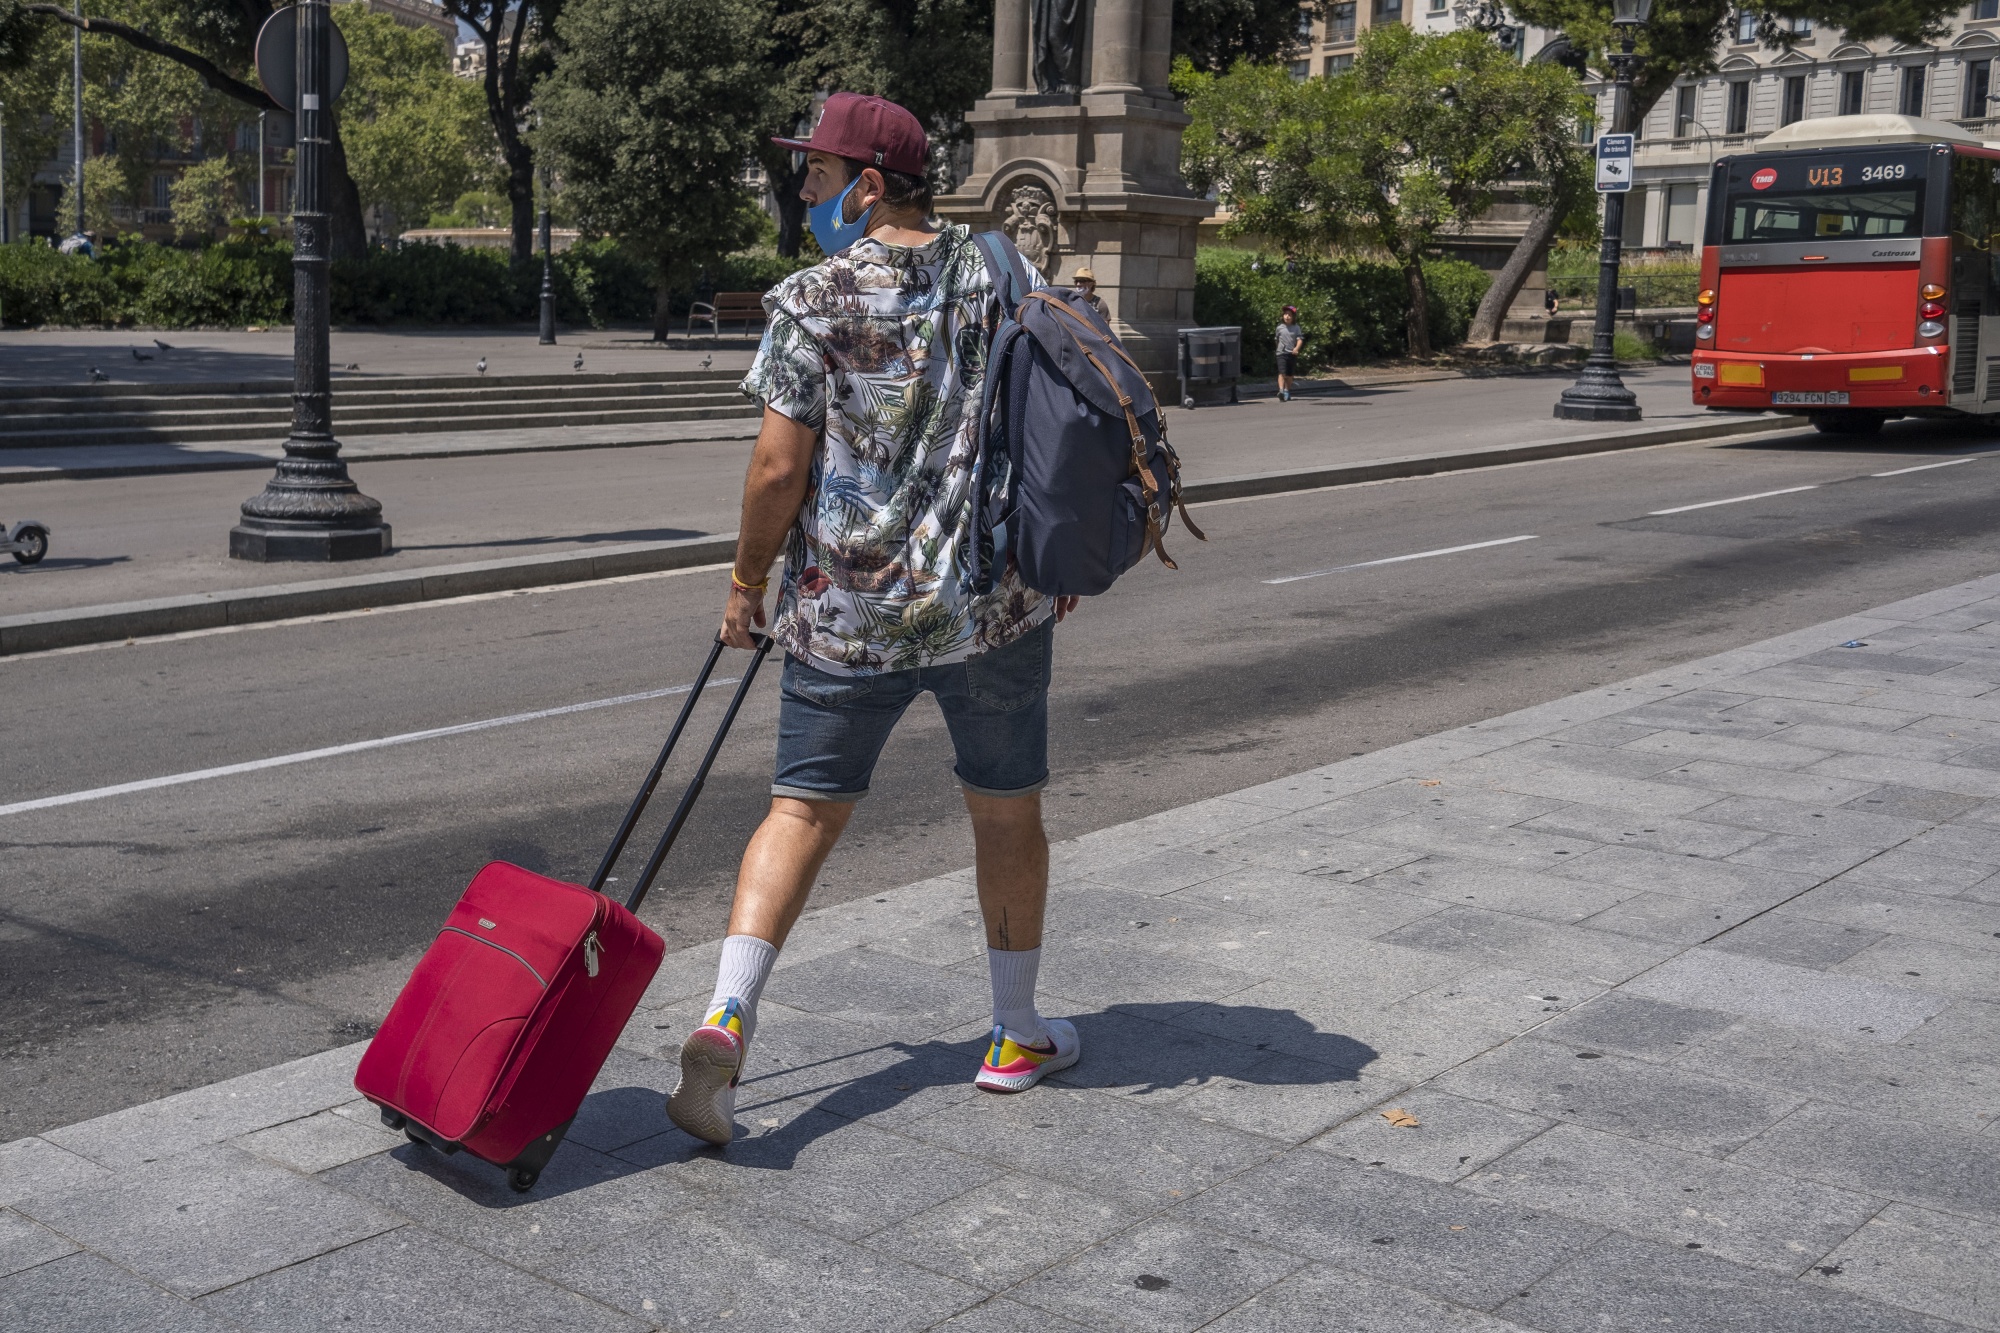 Barcelona is among the cities that have been dramatically affected by the rise of Airbnb. Can a new data portal improve the relationship between the home-sharing company and the municipalities that host it?&nbsp;&nbsp;